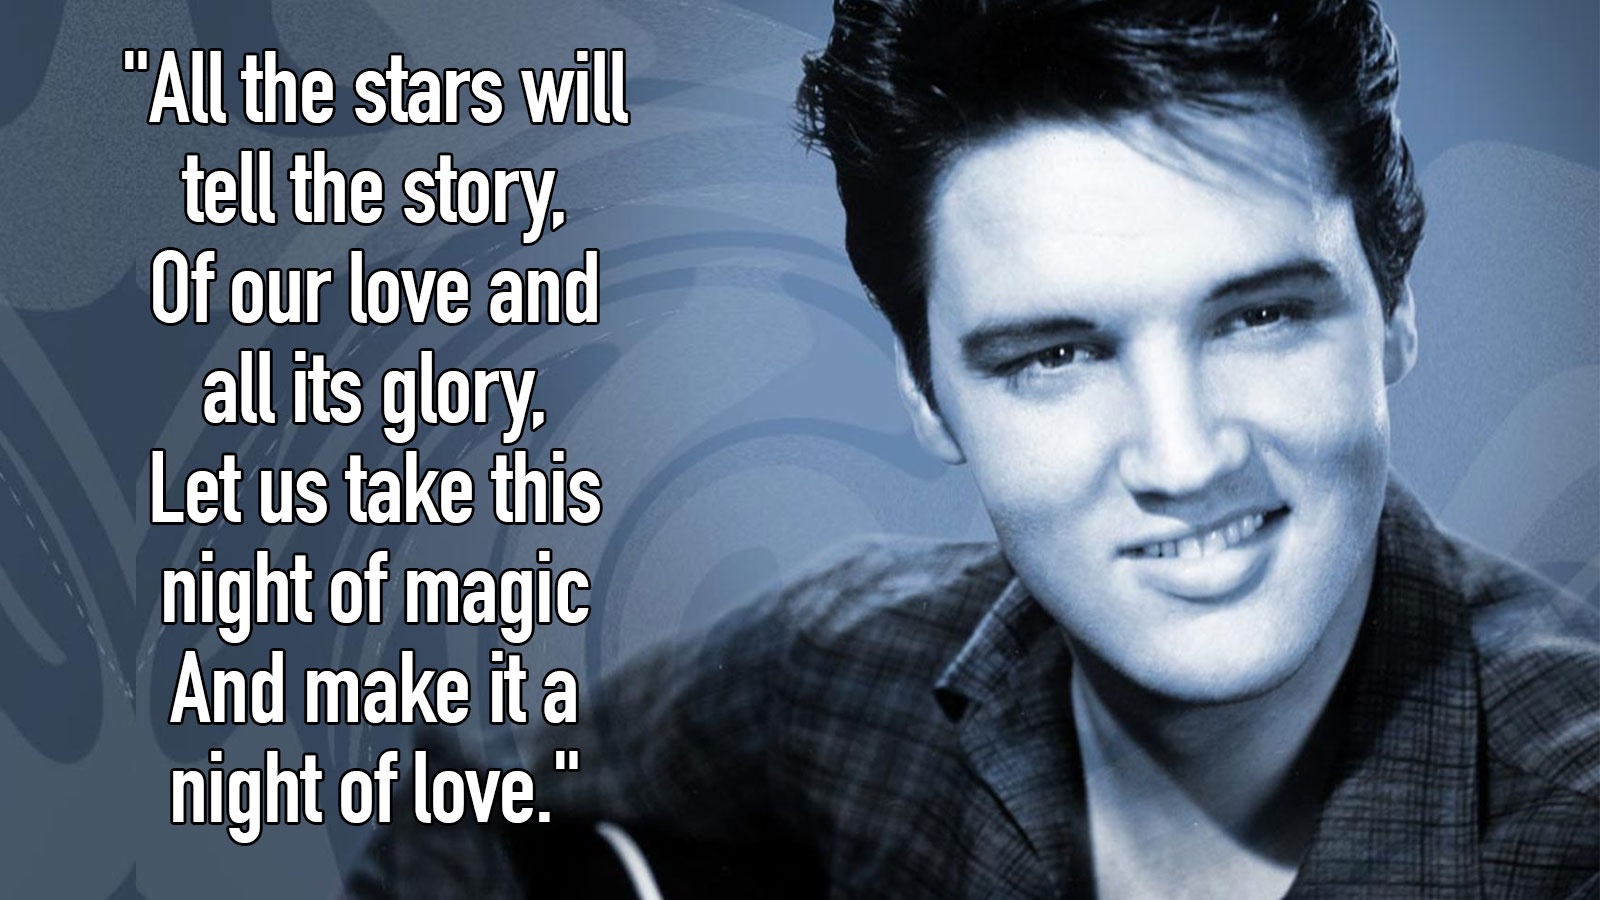 Can You Guess Which Elvis Presley Song This Lyric Is From? 111